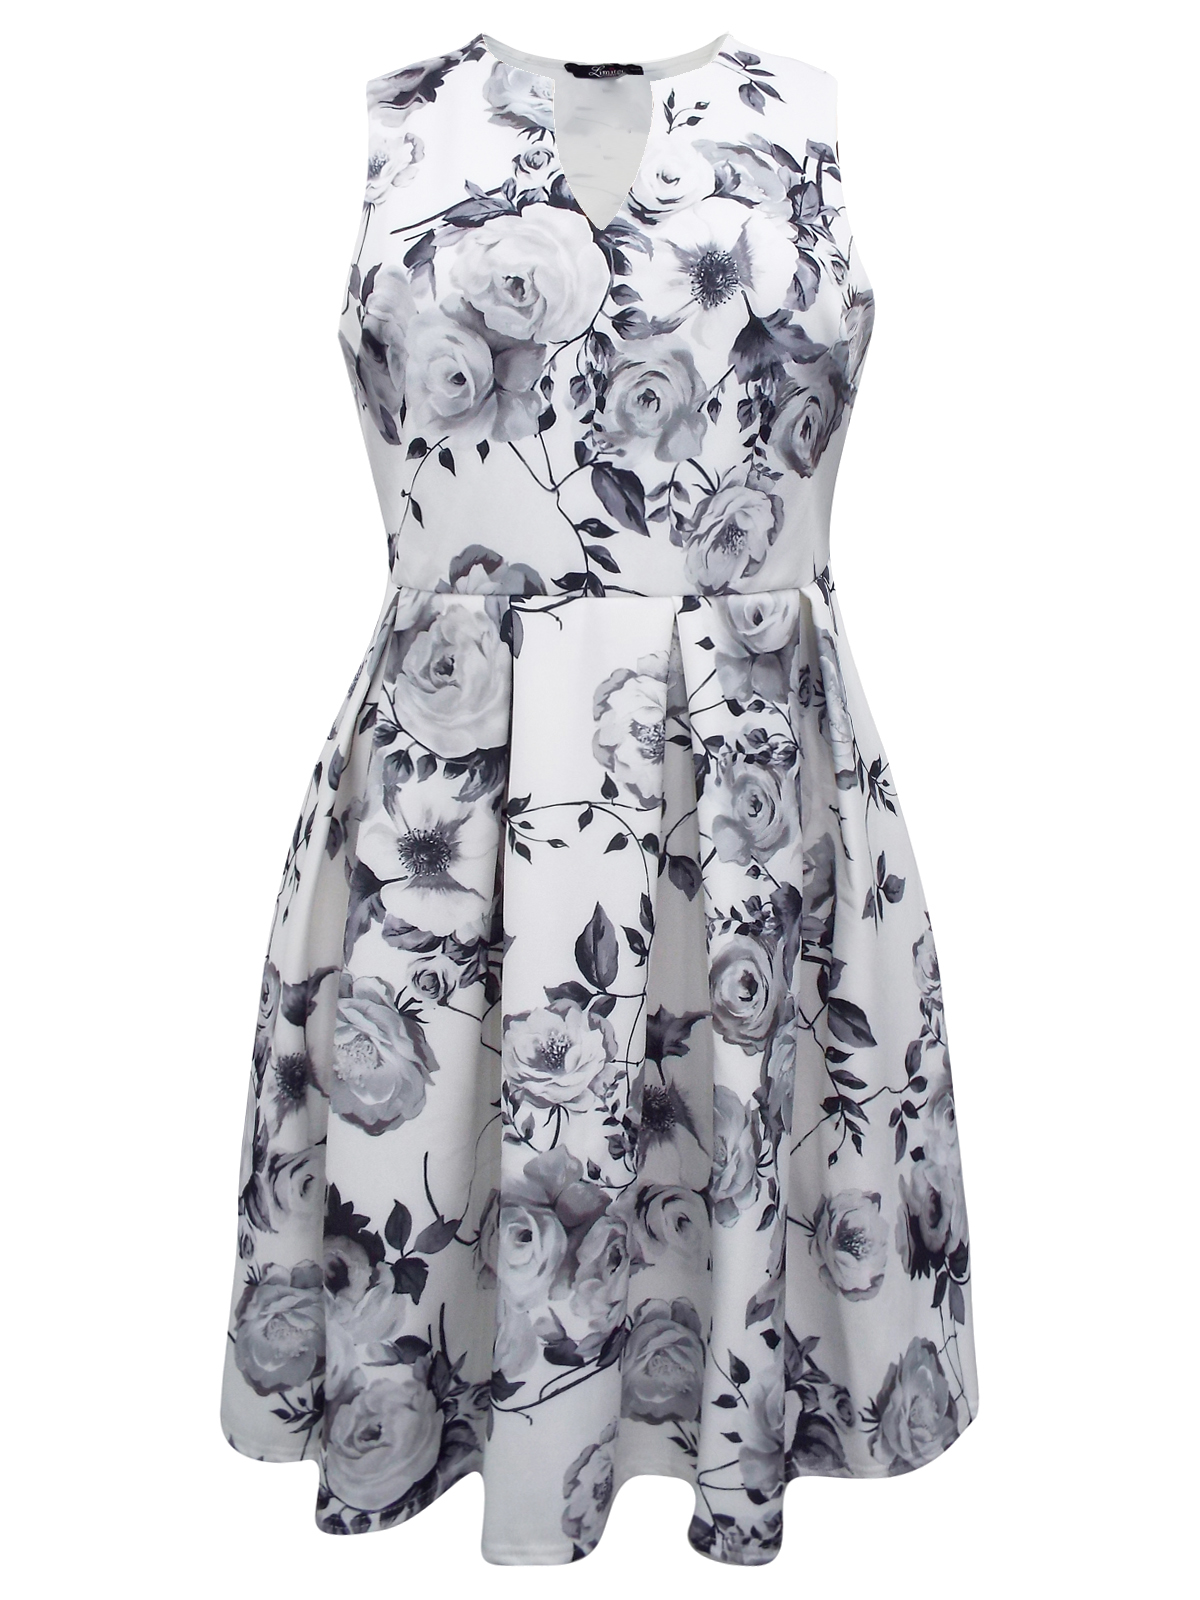 CURVE - - Yours WHITE Floral Print Fit & Flare Dress - Plus Size 16 to ...